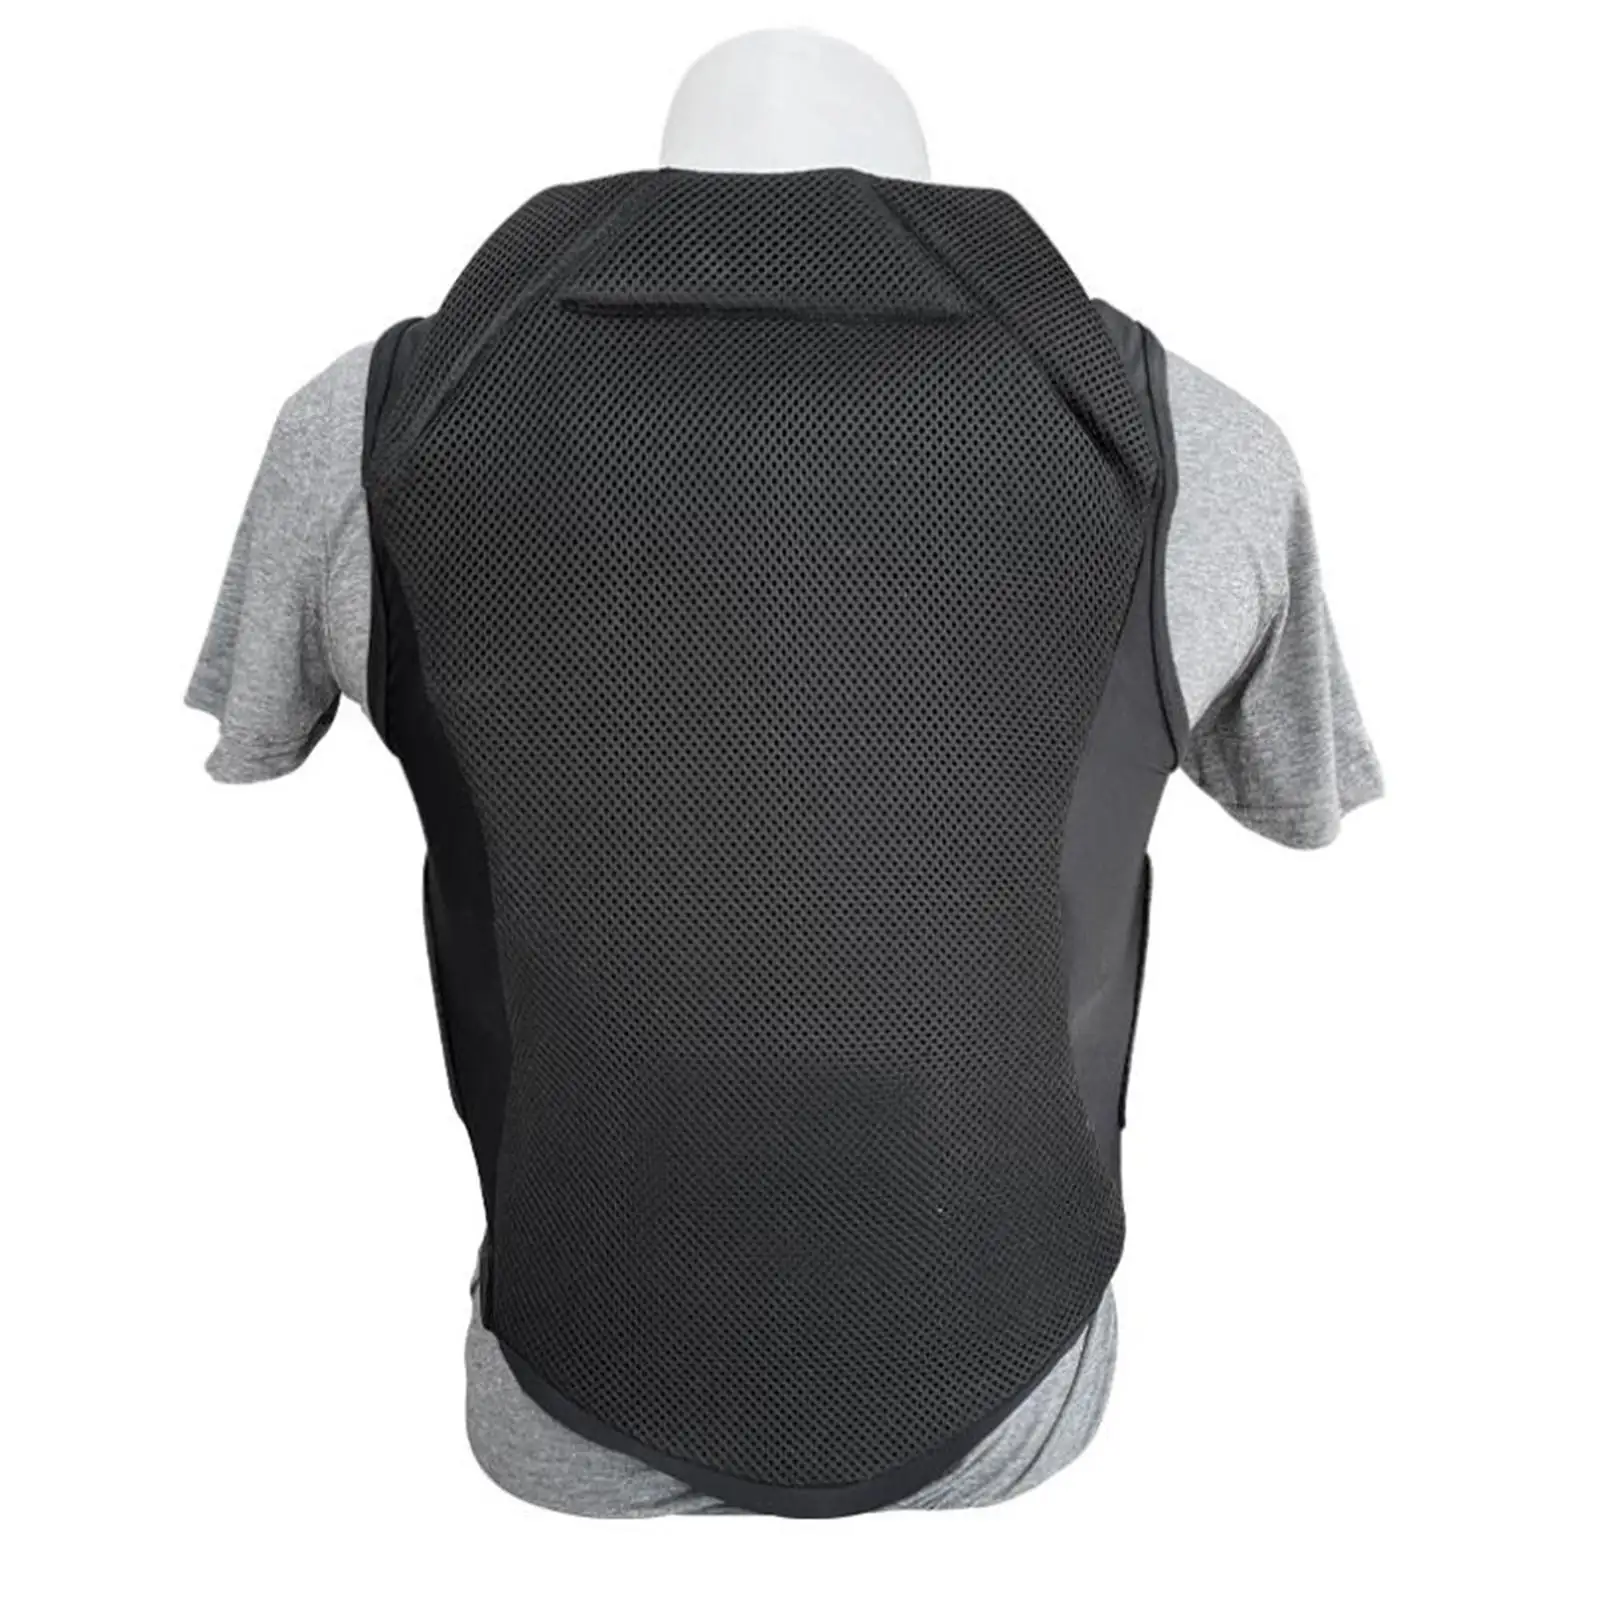 Equestrian Protective Body Protector Breathable EVA Padded Horse Riding Vest